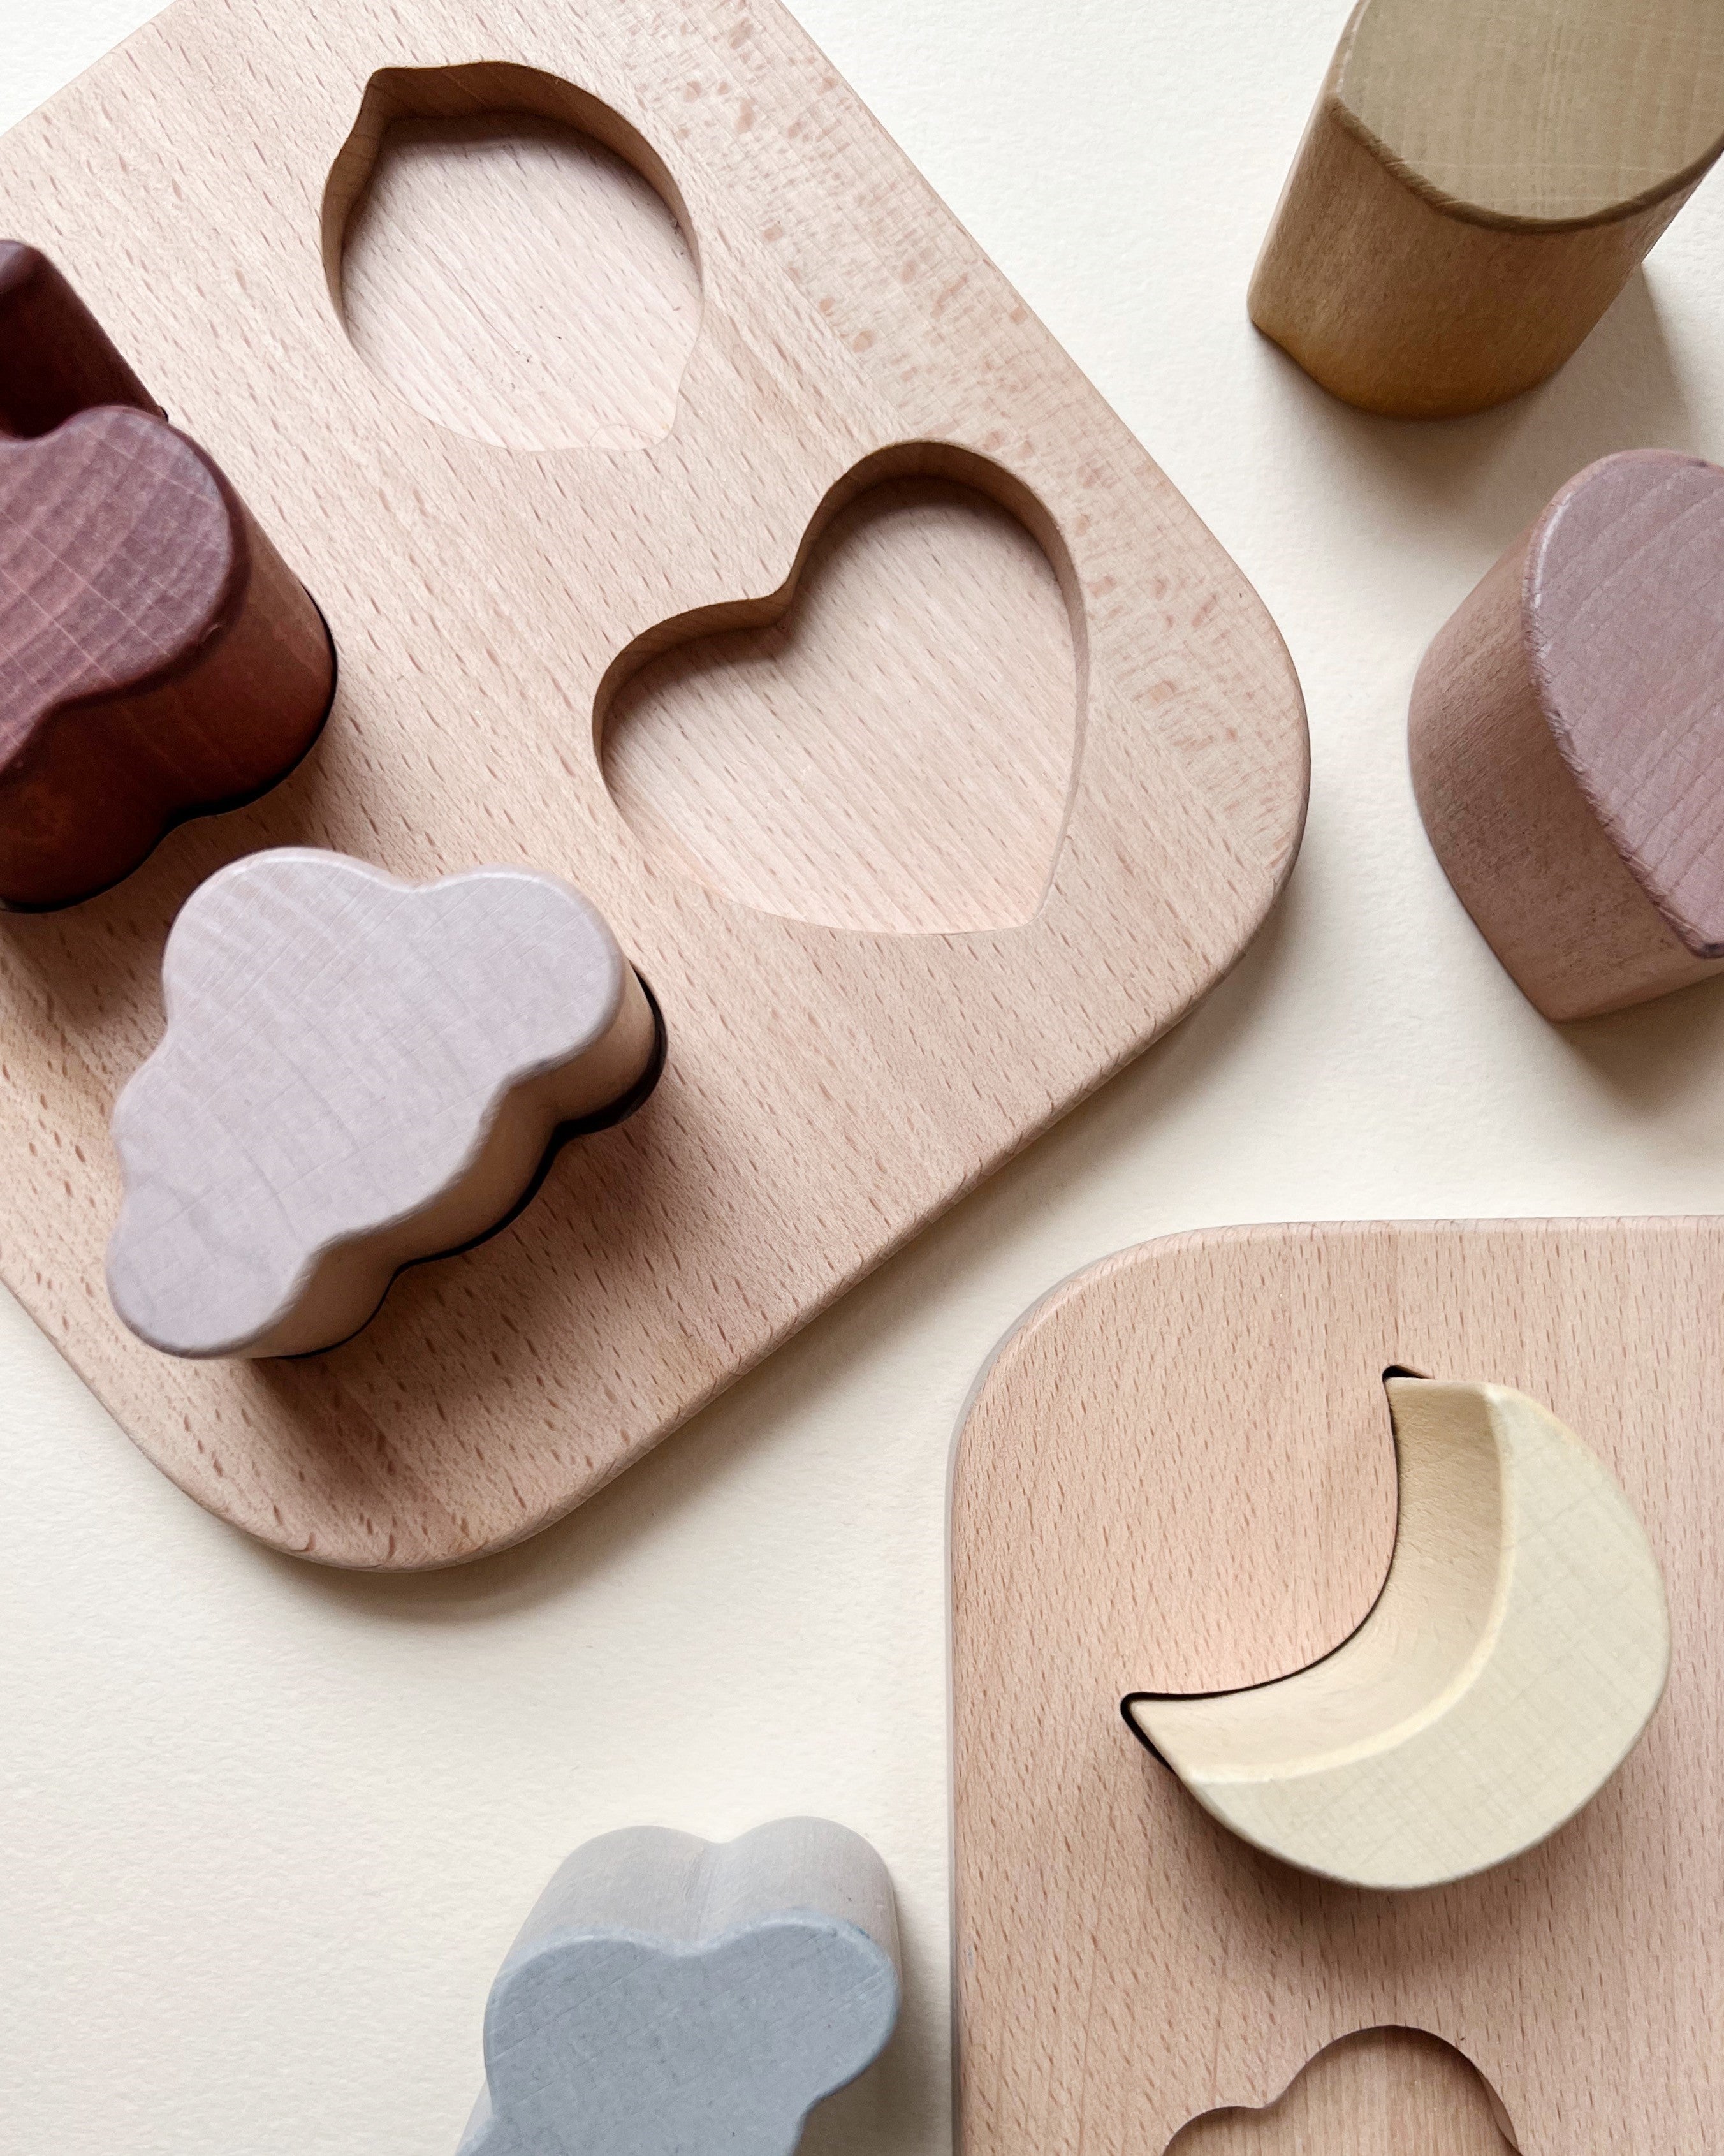 Wooden Chunky Shape Puzzle - Sky